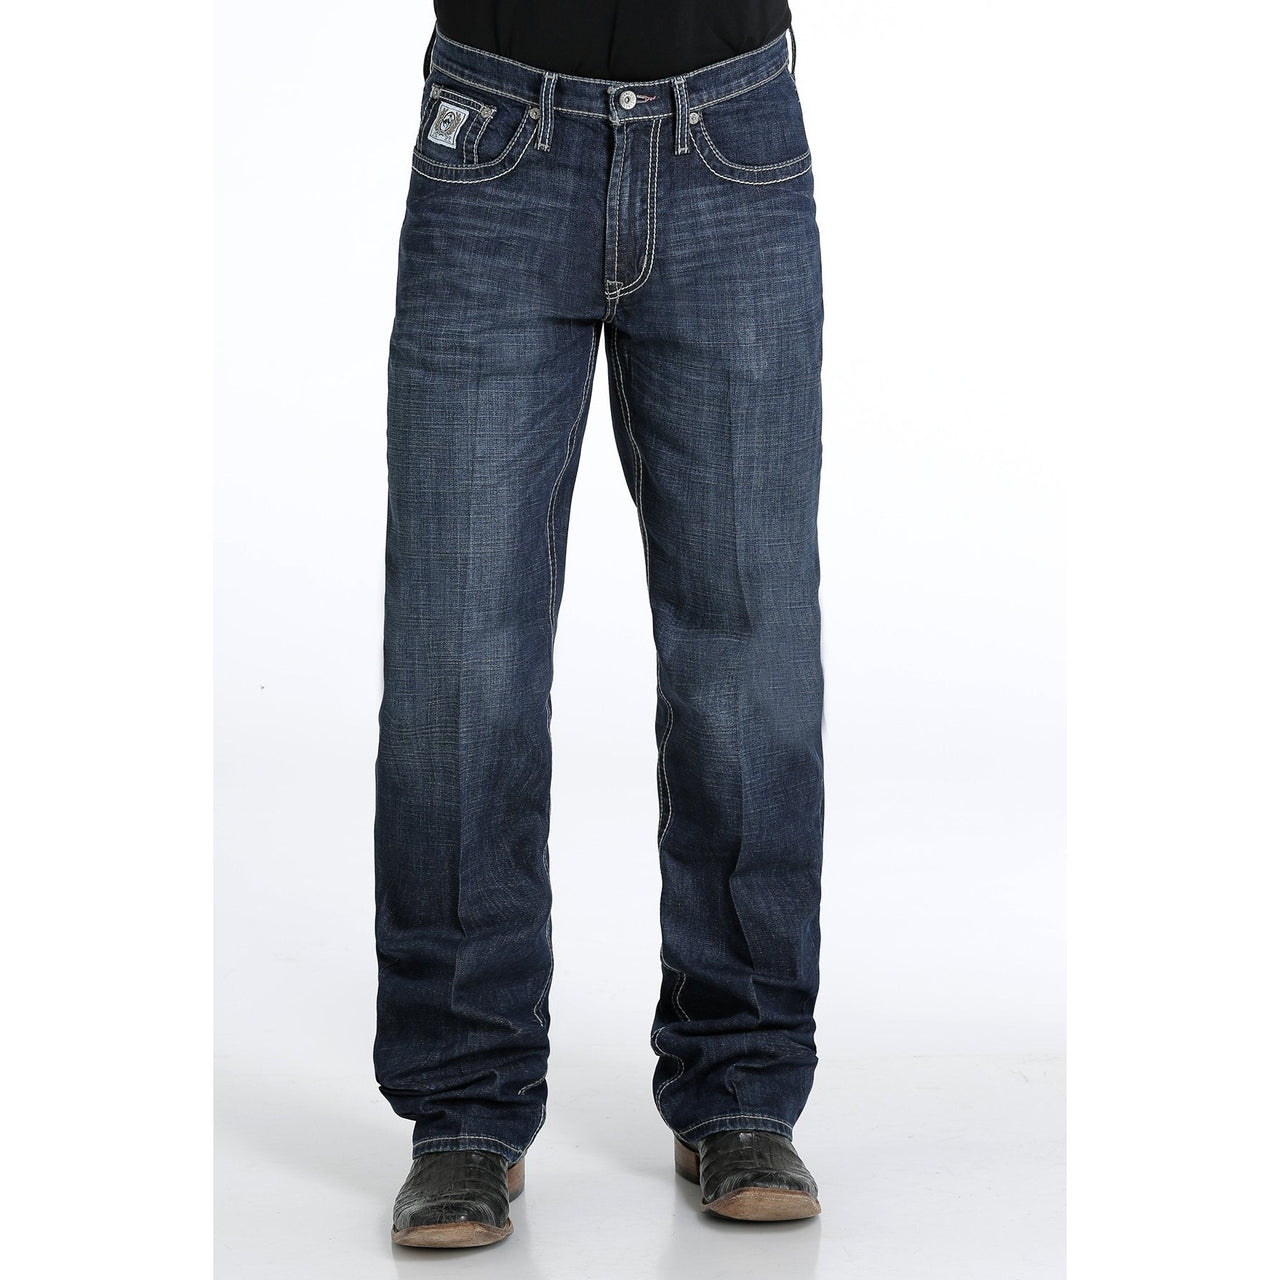 Aoochasliy Mens Jeans Clearance Reduced Price OUTDOORSPORT Men's